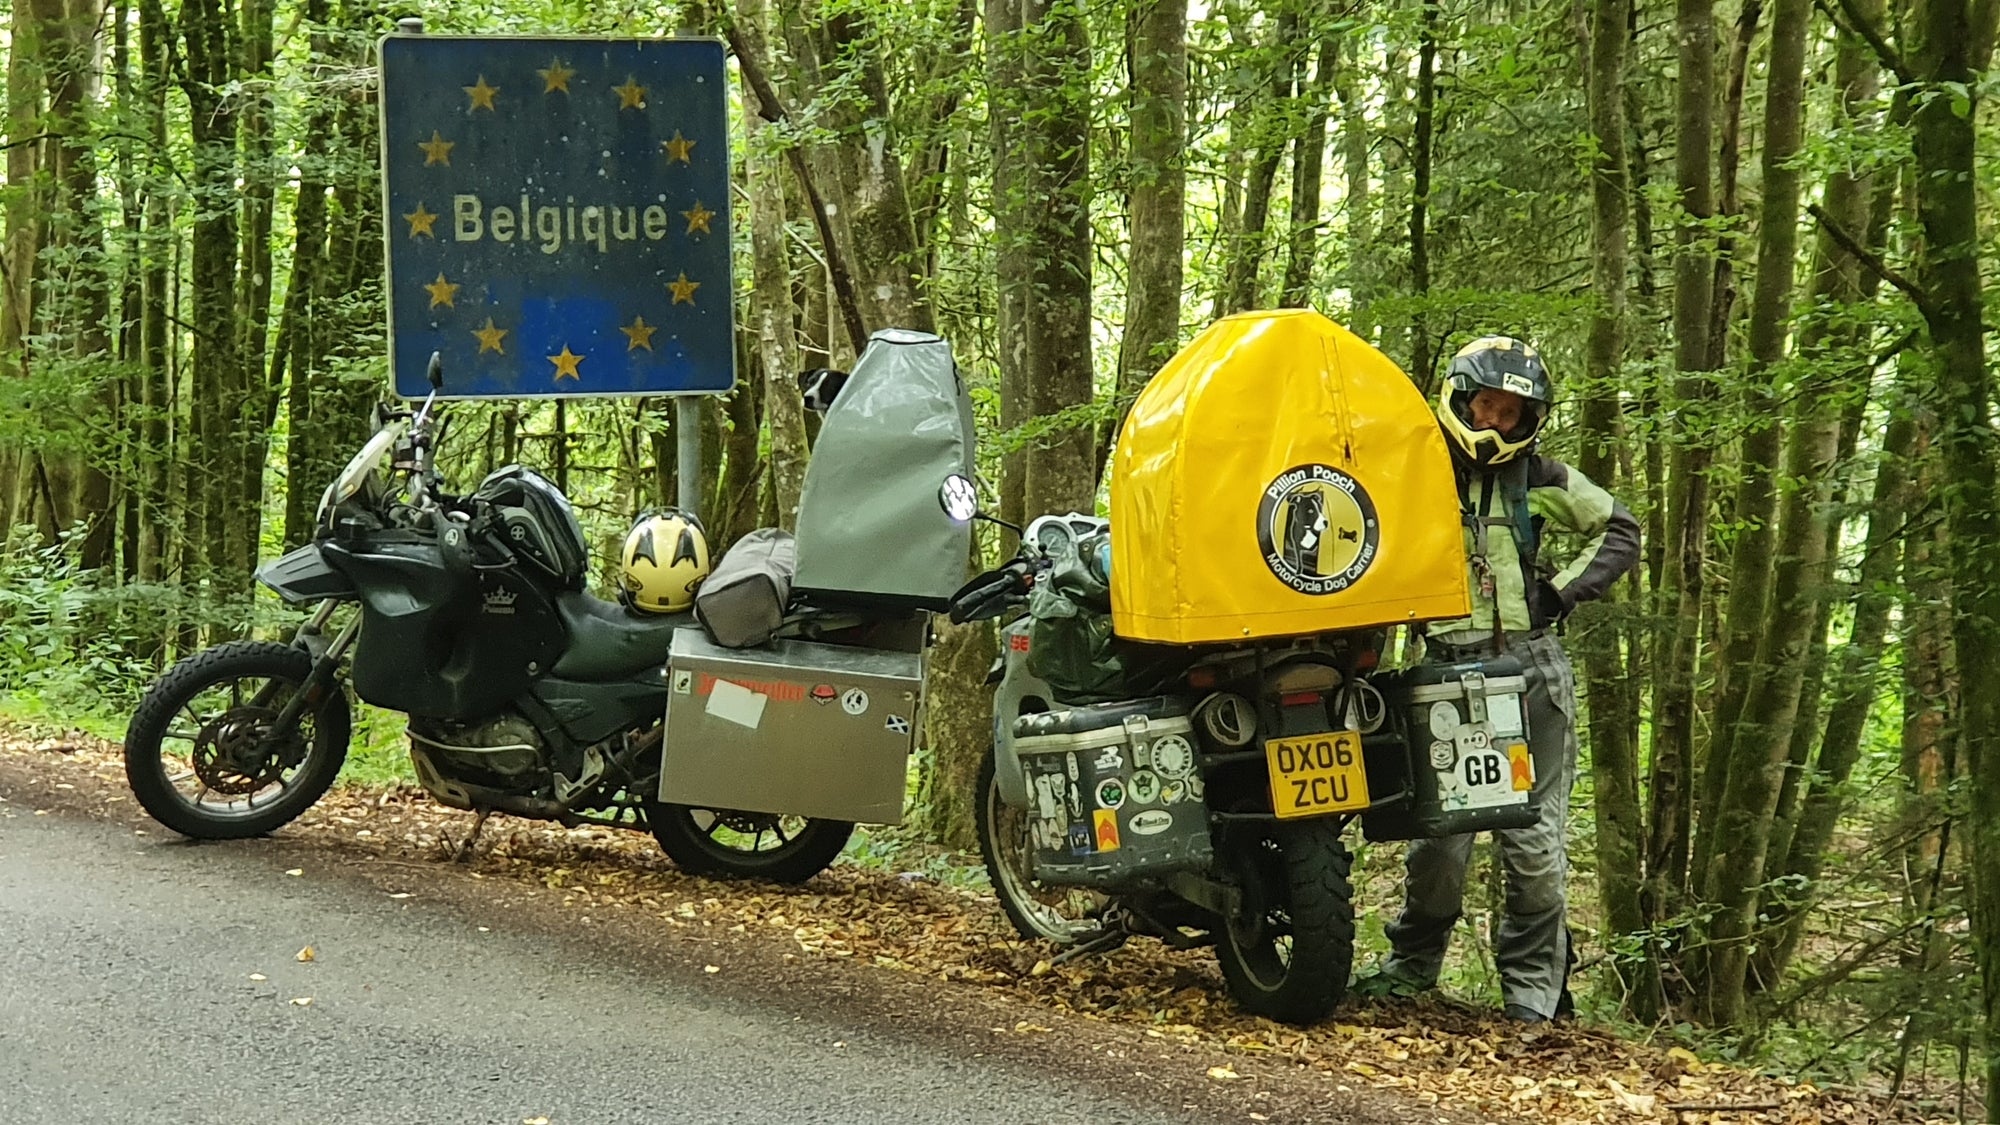 The Pack Track riding into Belgium. Mandatory photo of the Pillion Pooch's with the Belgium sign.